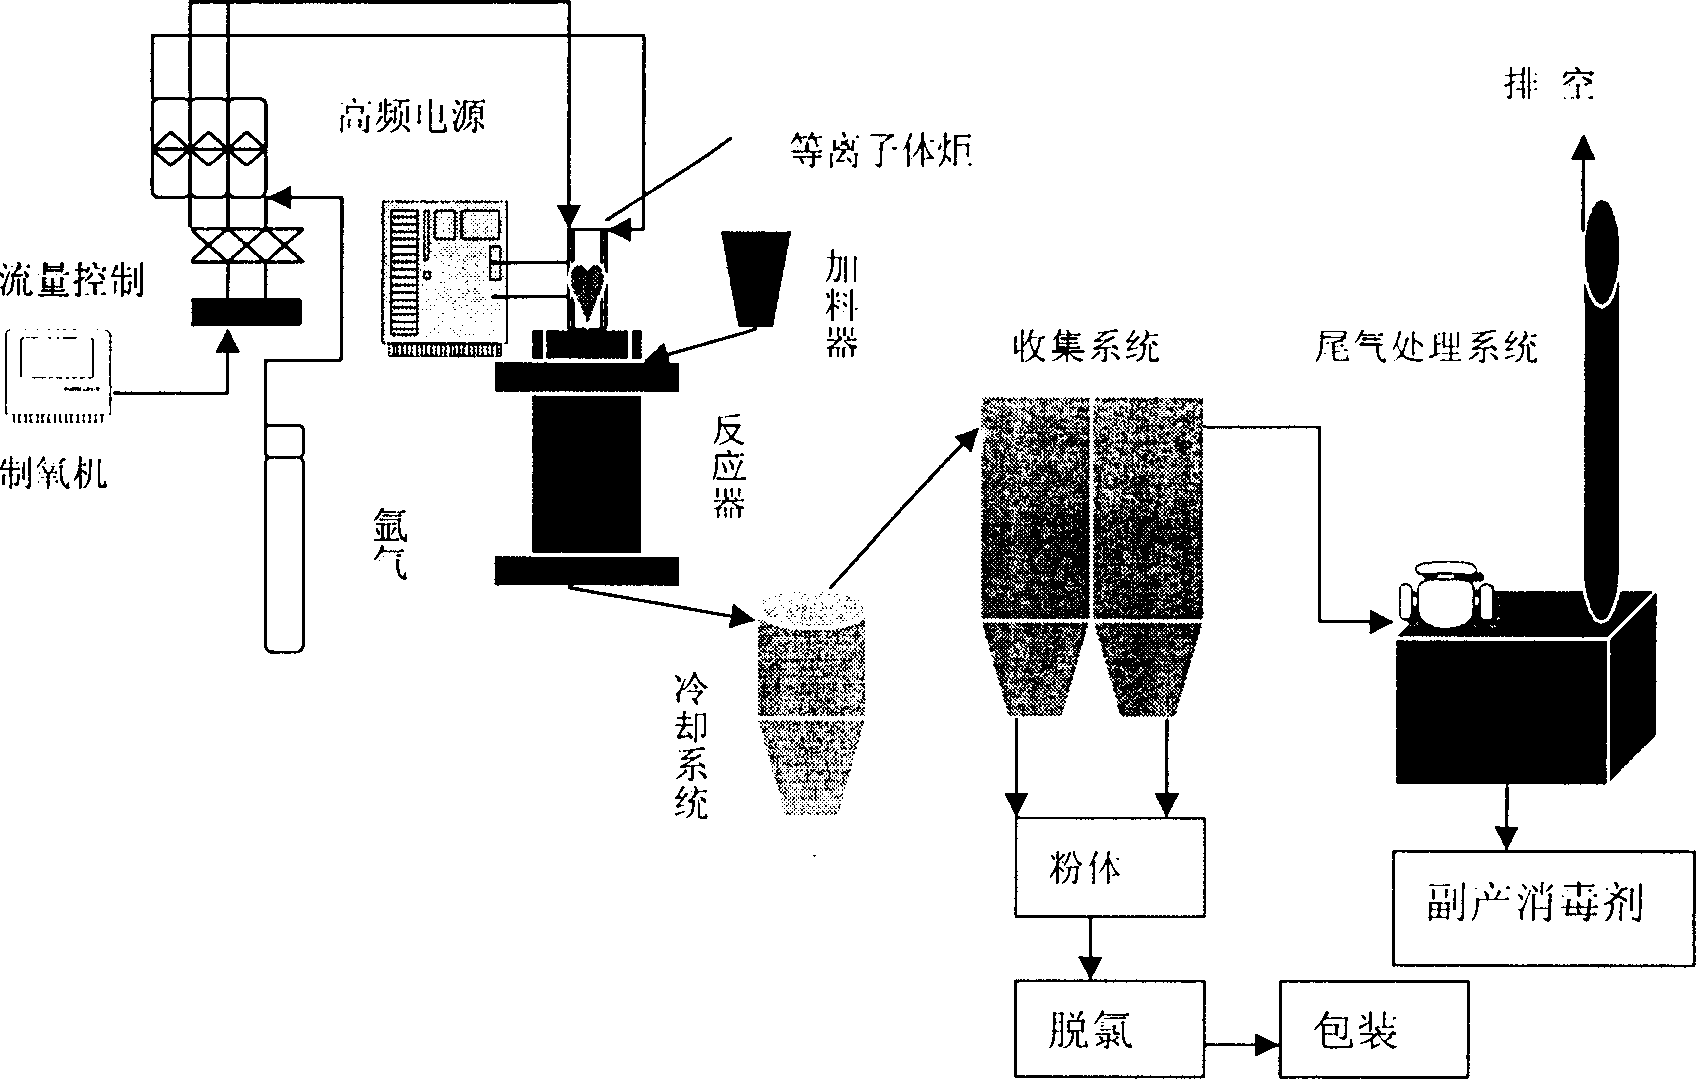 Preparation of high-purity nanometer silicon dioxide